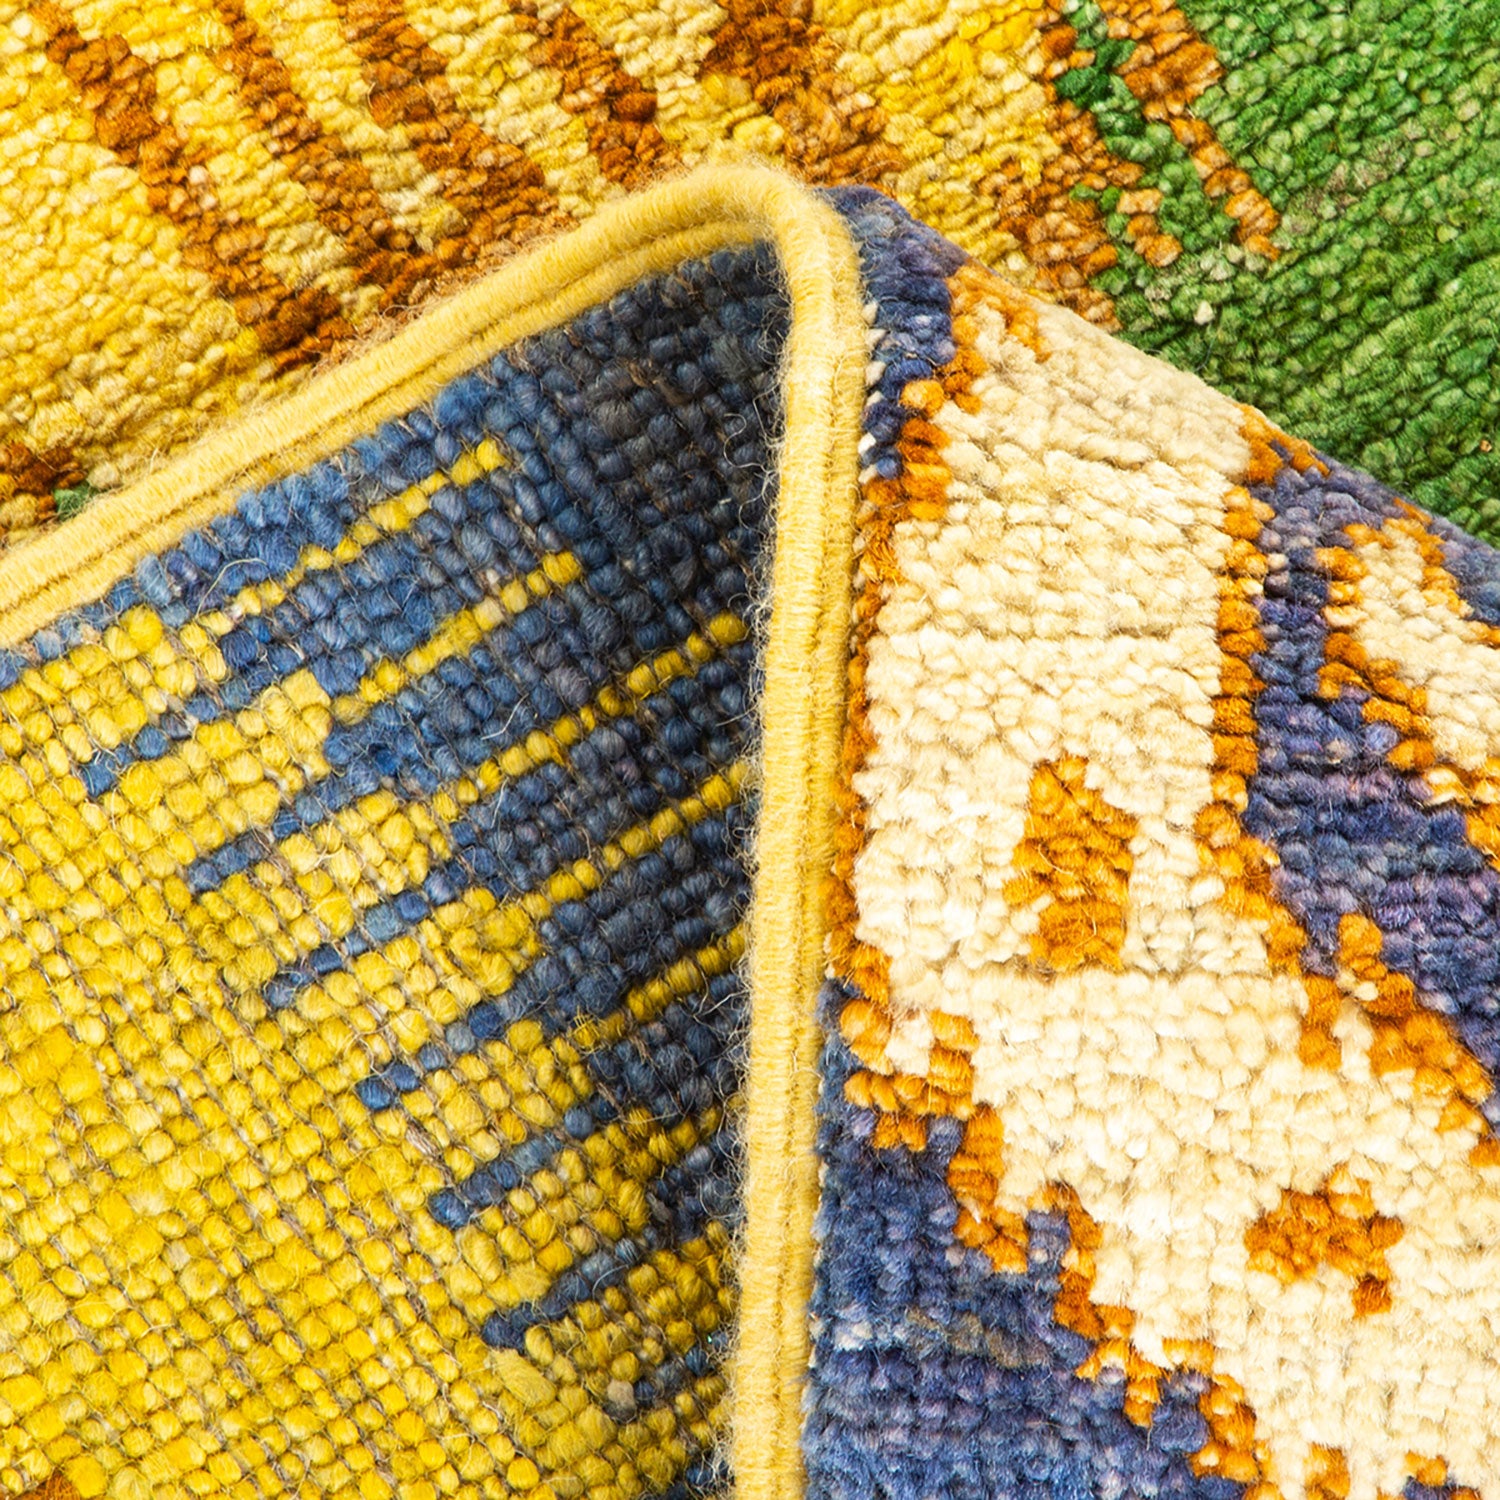 Close-up of a vibrant, intricately woven textile with vivid colors.